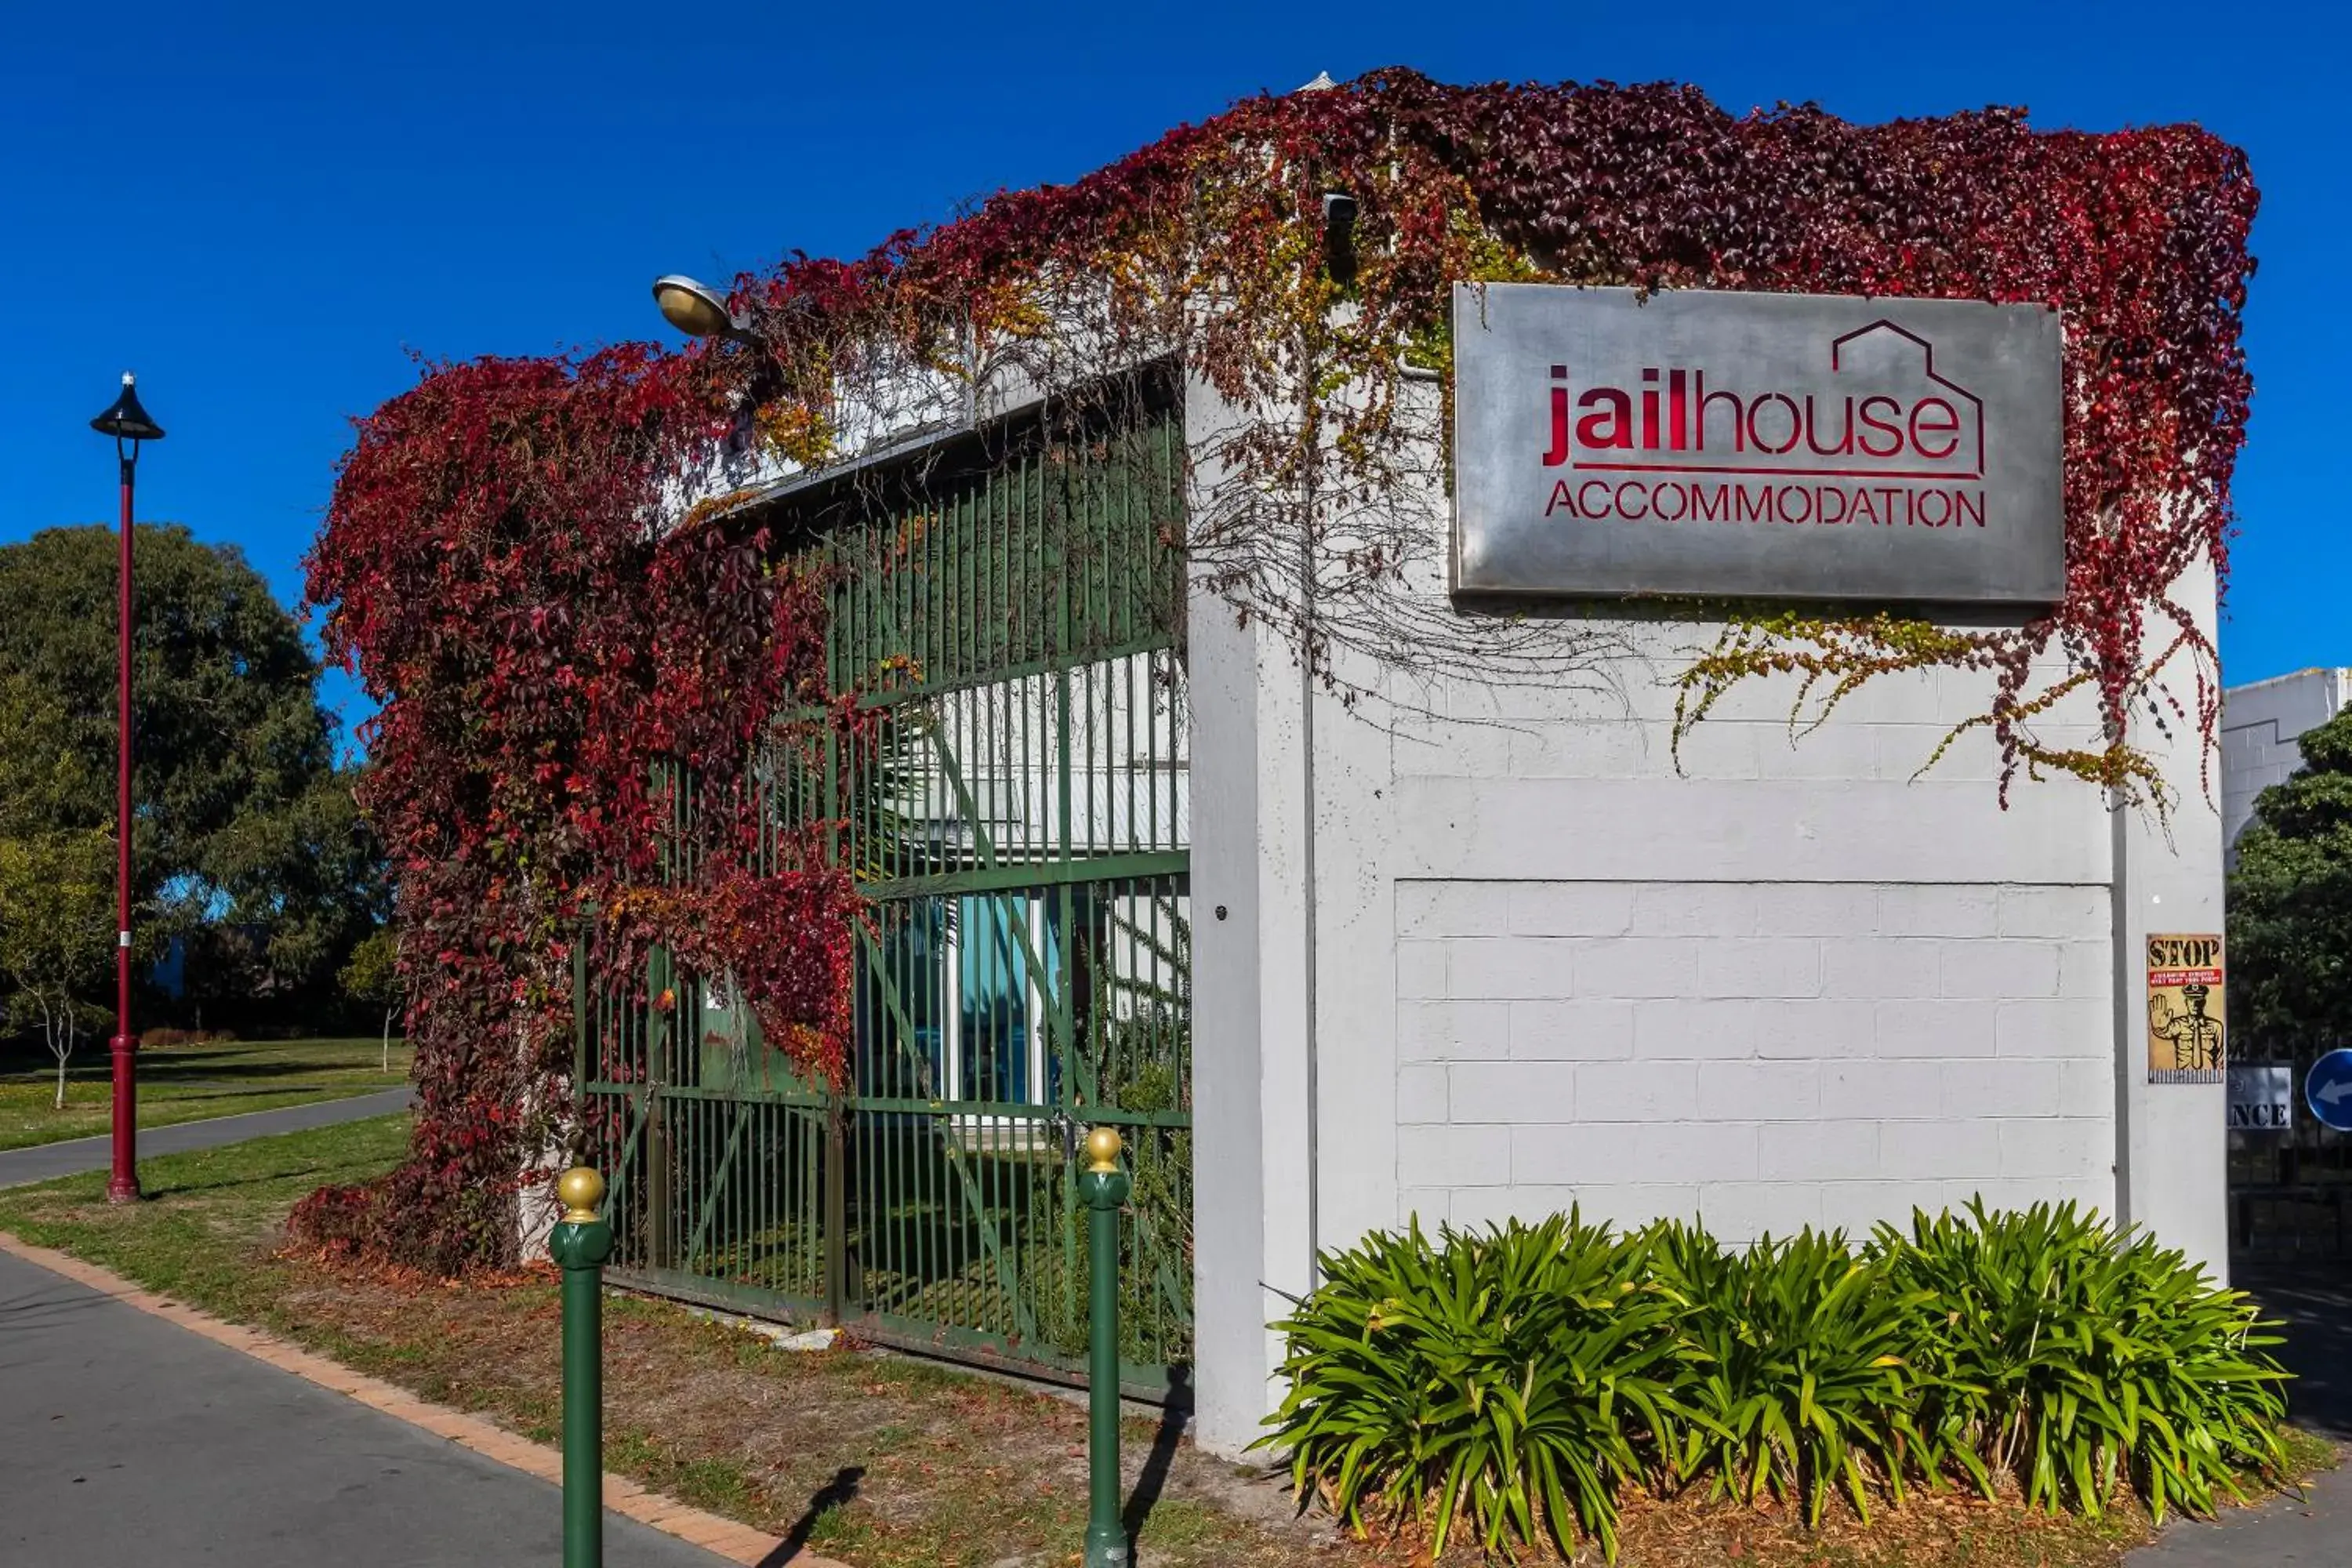 Logo/Certificate/Sign, Property Building in Jailhouse Accommodation